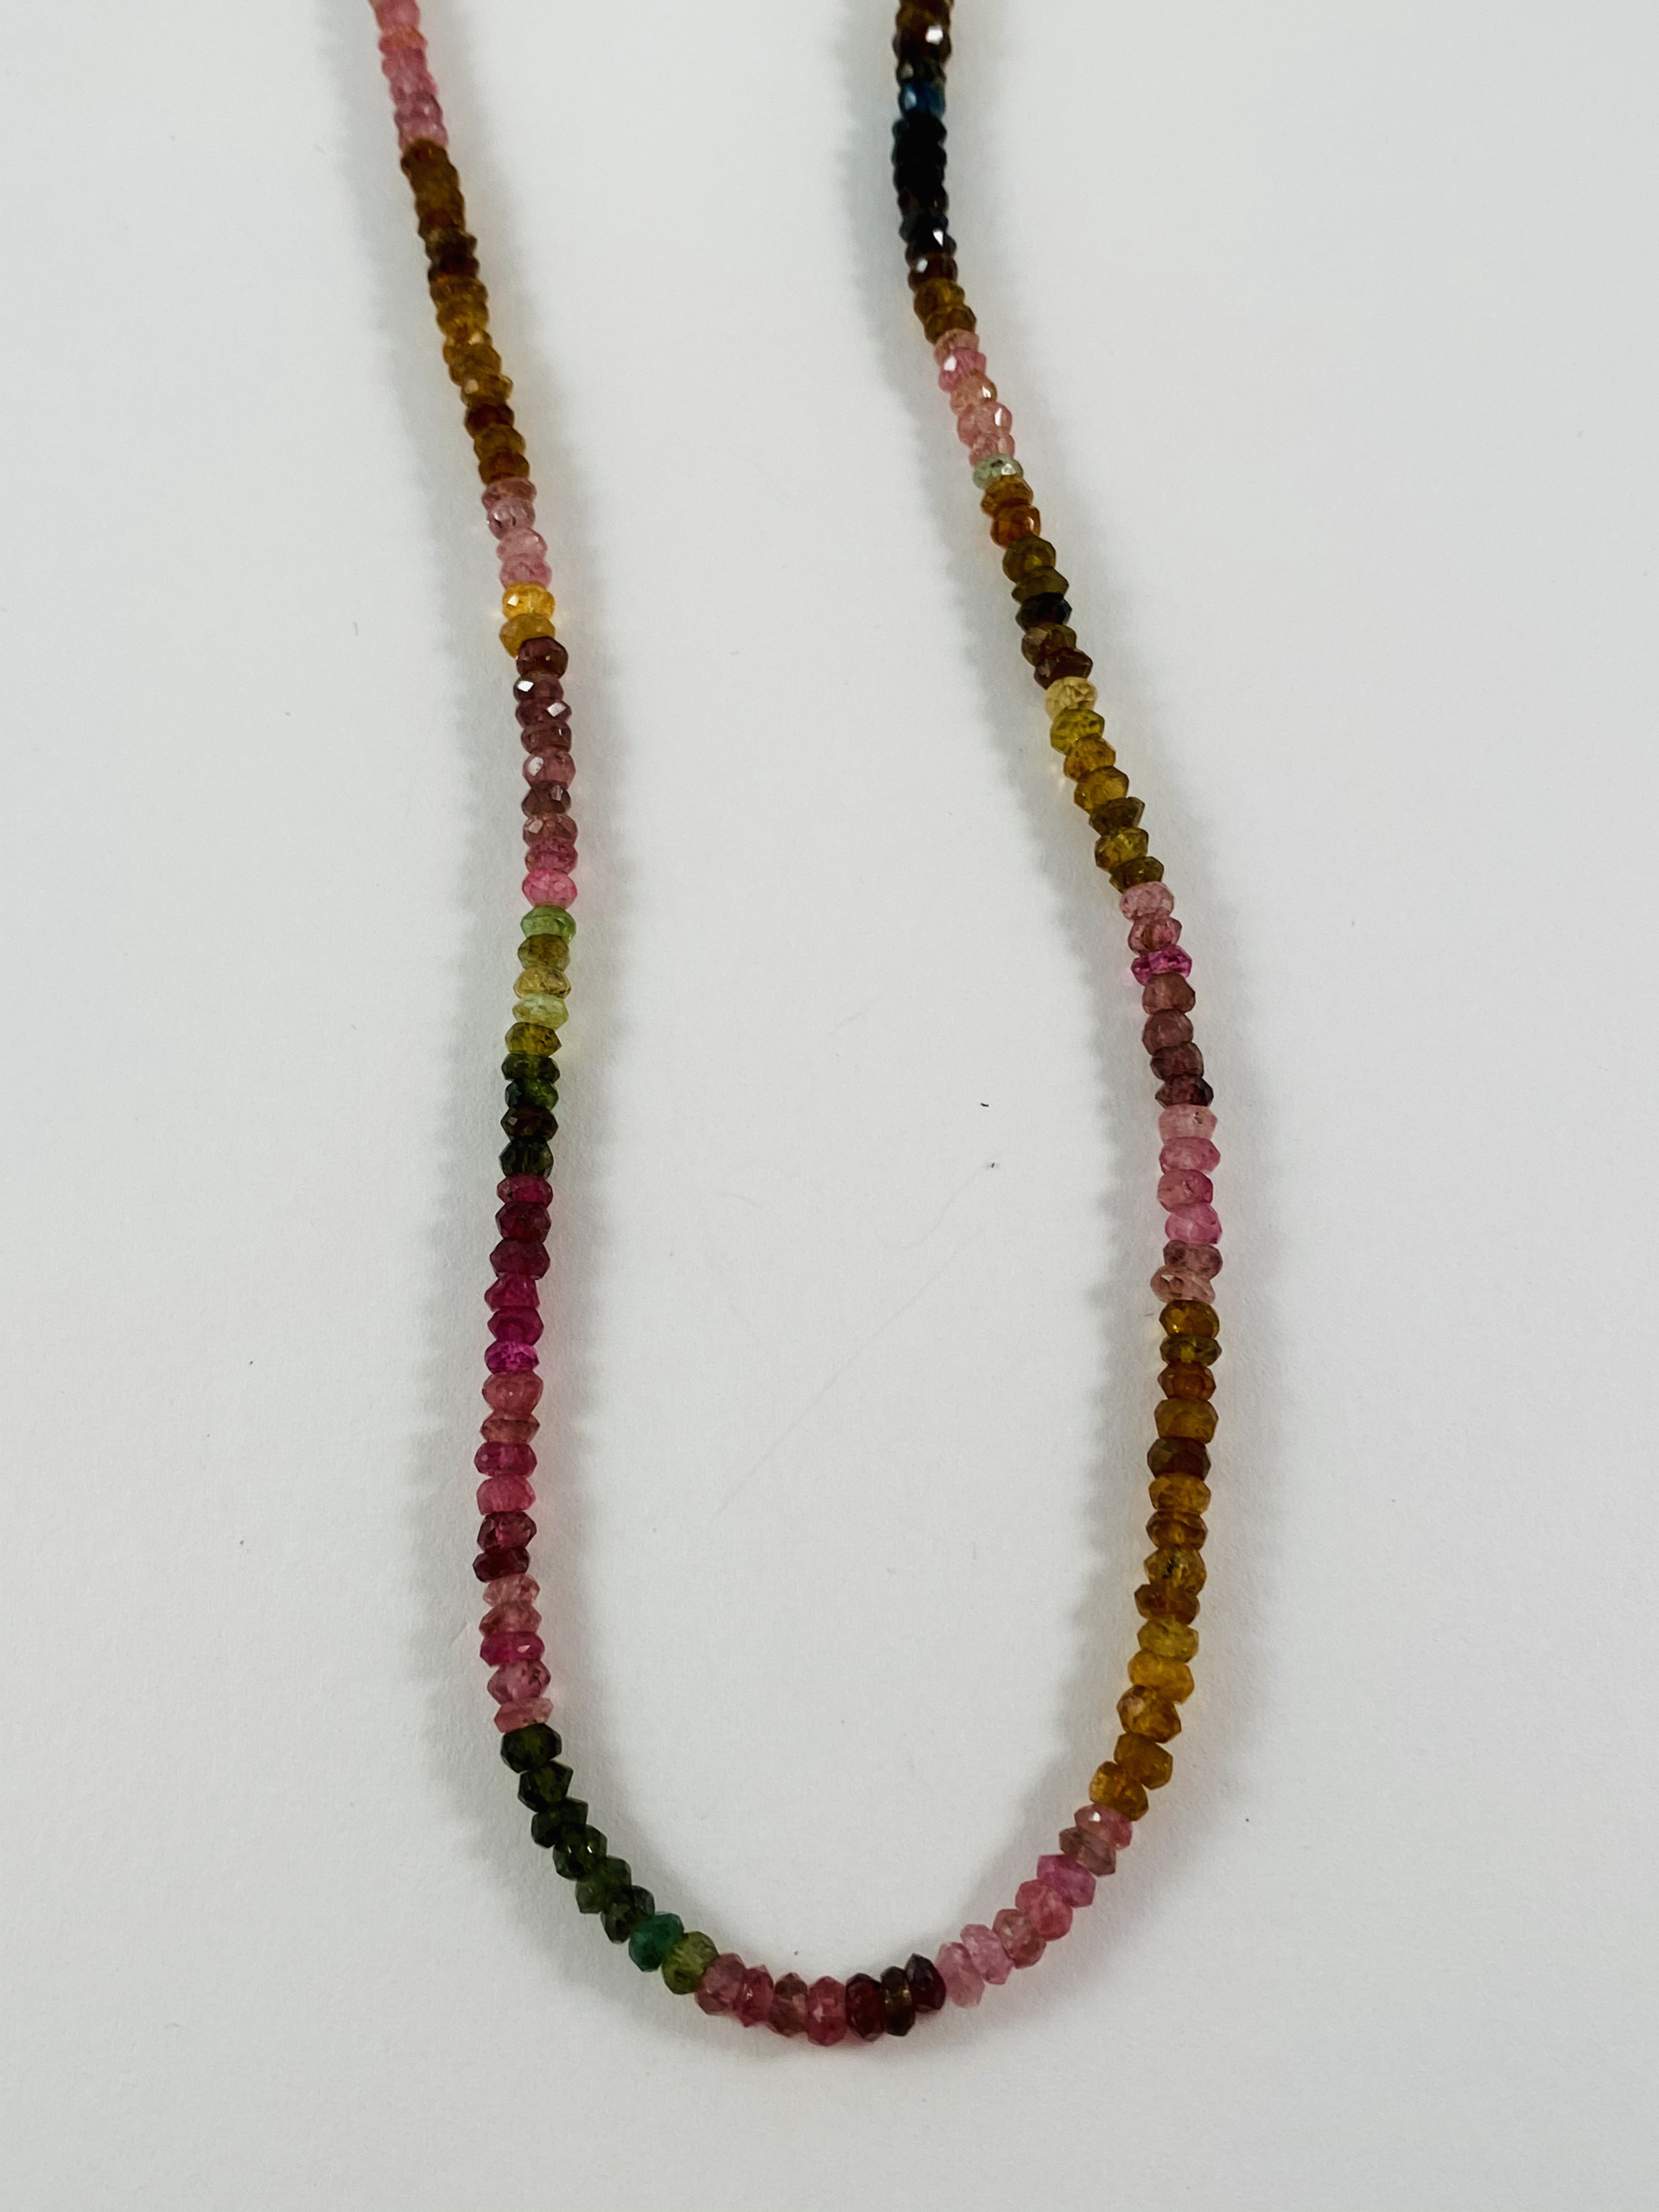 Faceted Multicolored Tourmaline Necklace by Nance Trueworthy